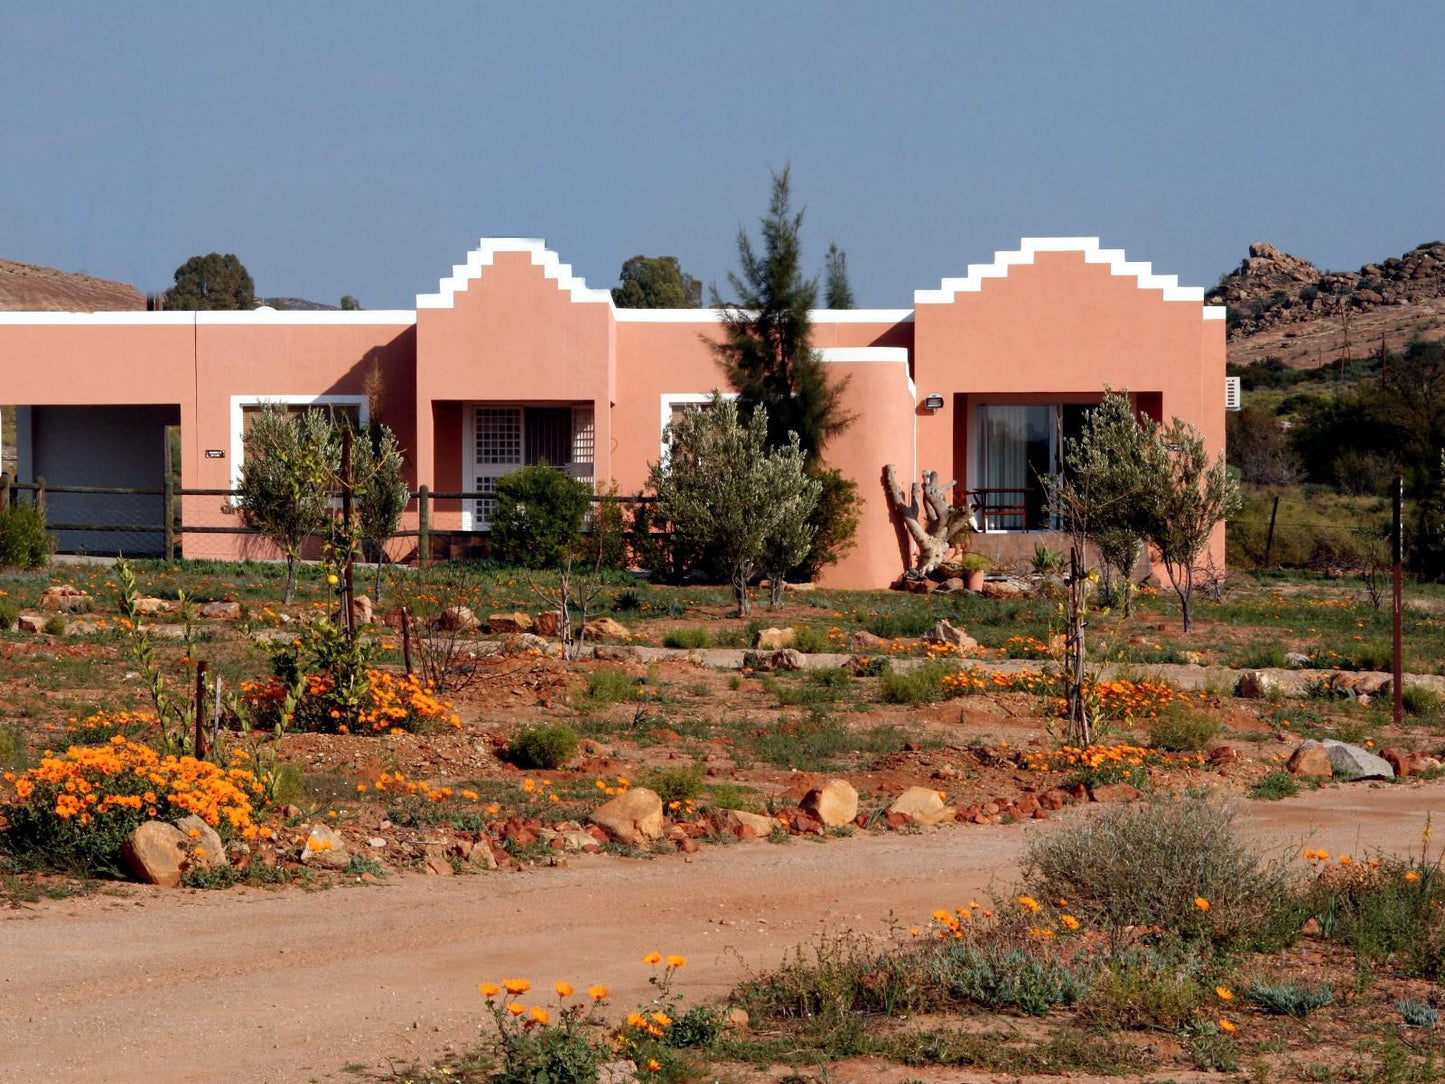 Daisy Country Lodge Springbok Northern Cape South Africa Building, Architecture, Cactus, Plant, Nature, House, Desert, Sand